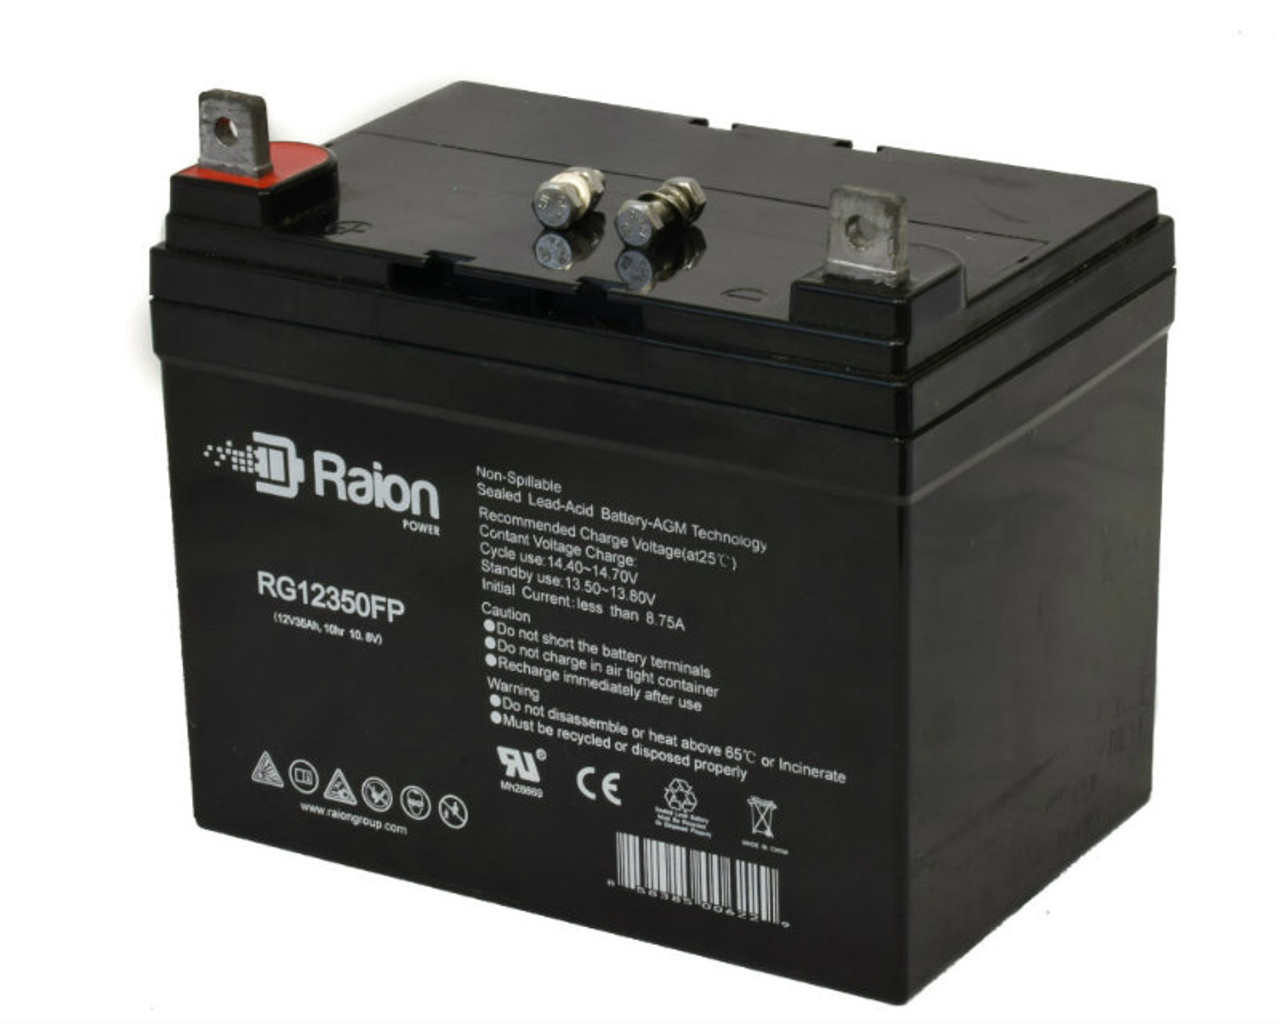 Raion Power Replacement 12V 35Ah RG12350FP Mobility Scooter Battery for Electric Mobility Rascal 252LE Candy Apple